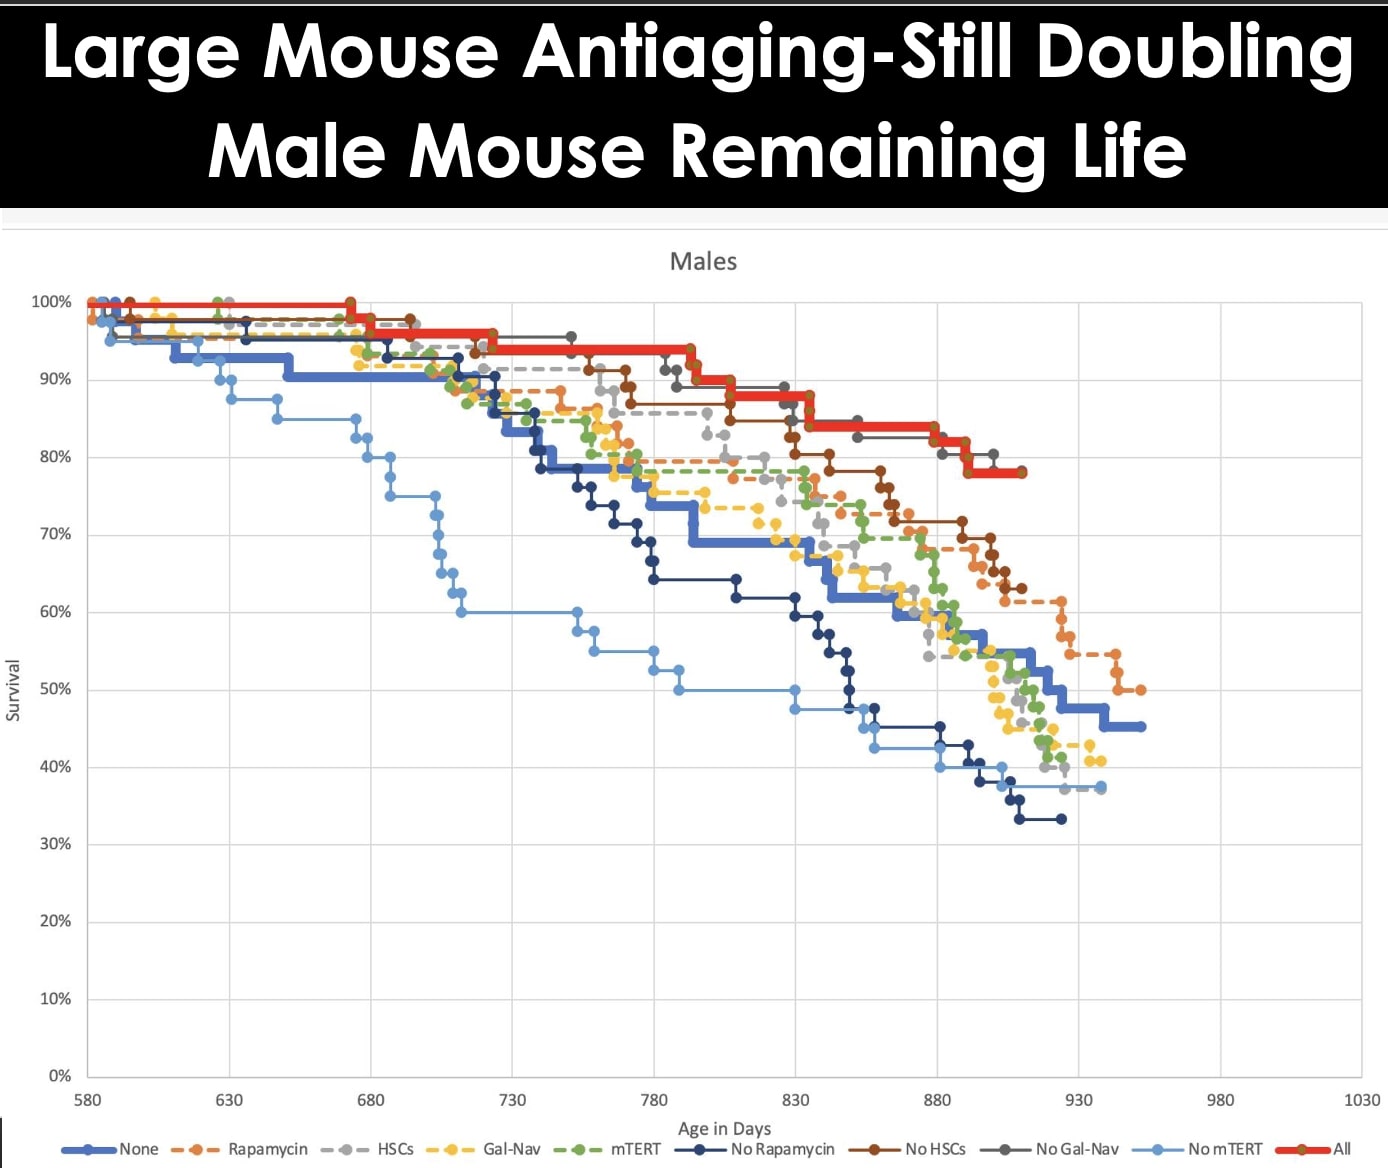 Large Mouse Study Still Tracking to Experimentally Doubling Remaining Life of Middle Age Male Mice